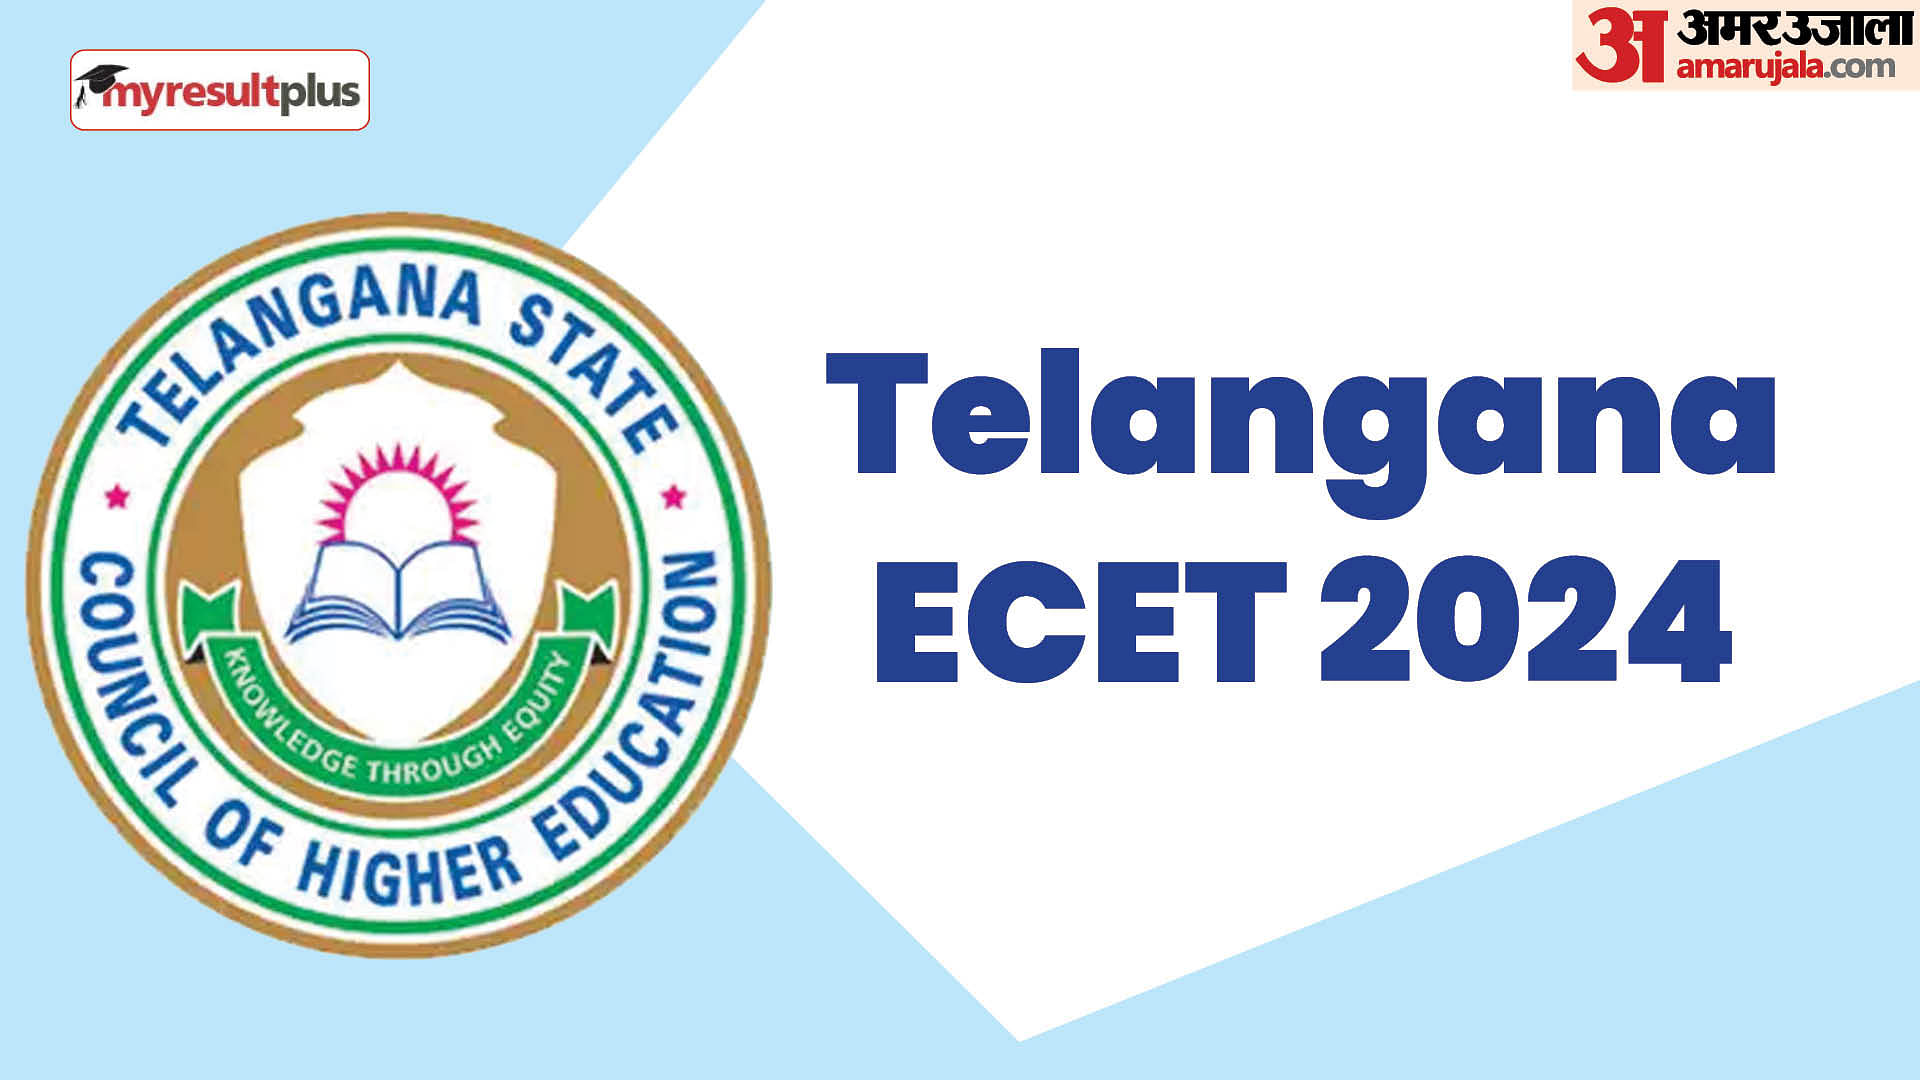 TS ECET 2024 registration window closing today, Apply now at ecet.tsche.ac.in